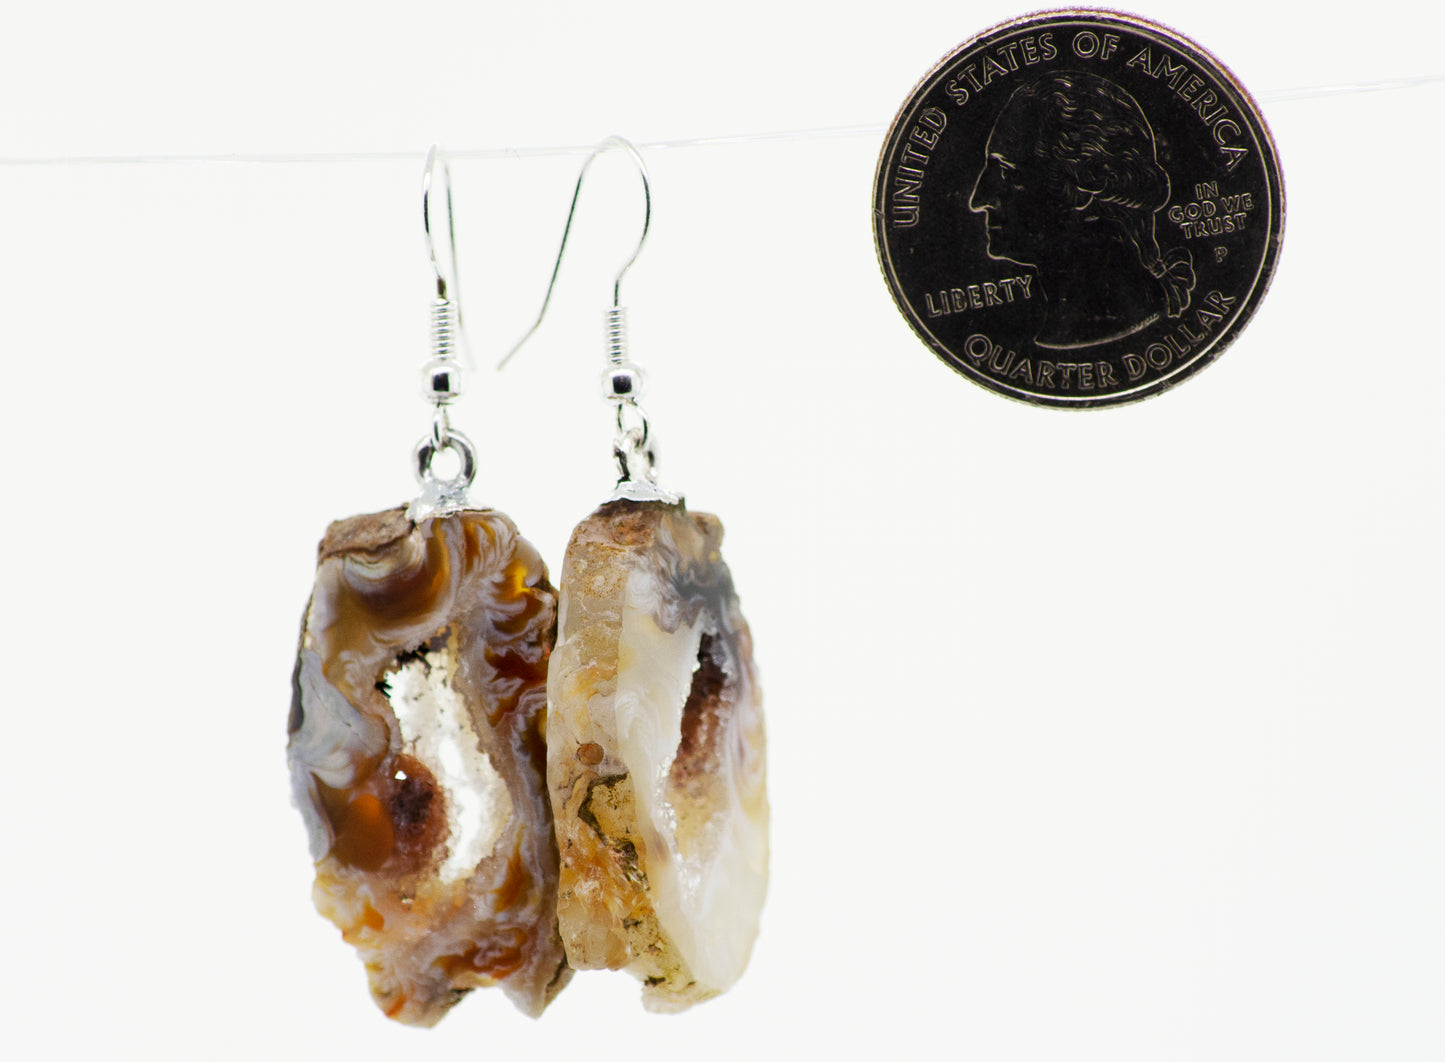 A stunning pair of Agate Geode Slice Earrings featuring a quarter-shaped center cutout, adorned with Agate Geode slices and dangling from elegant Silver-plated hooks.